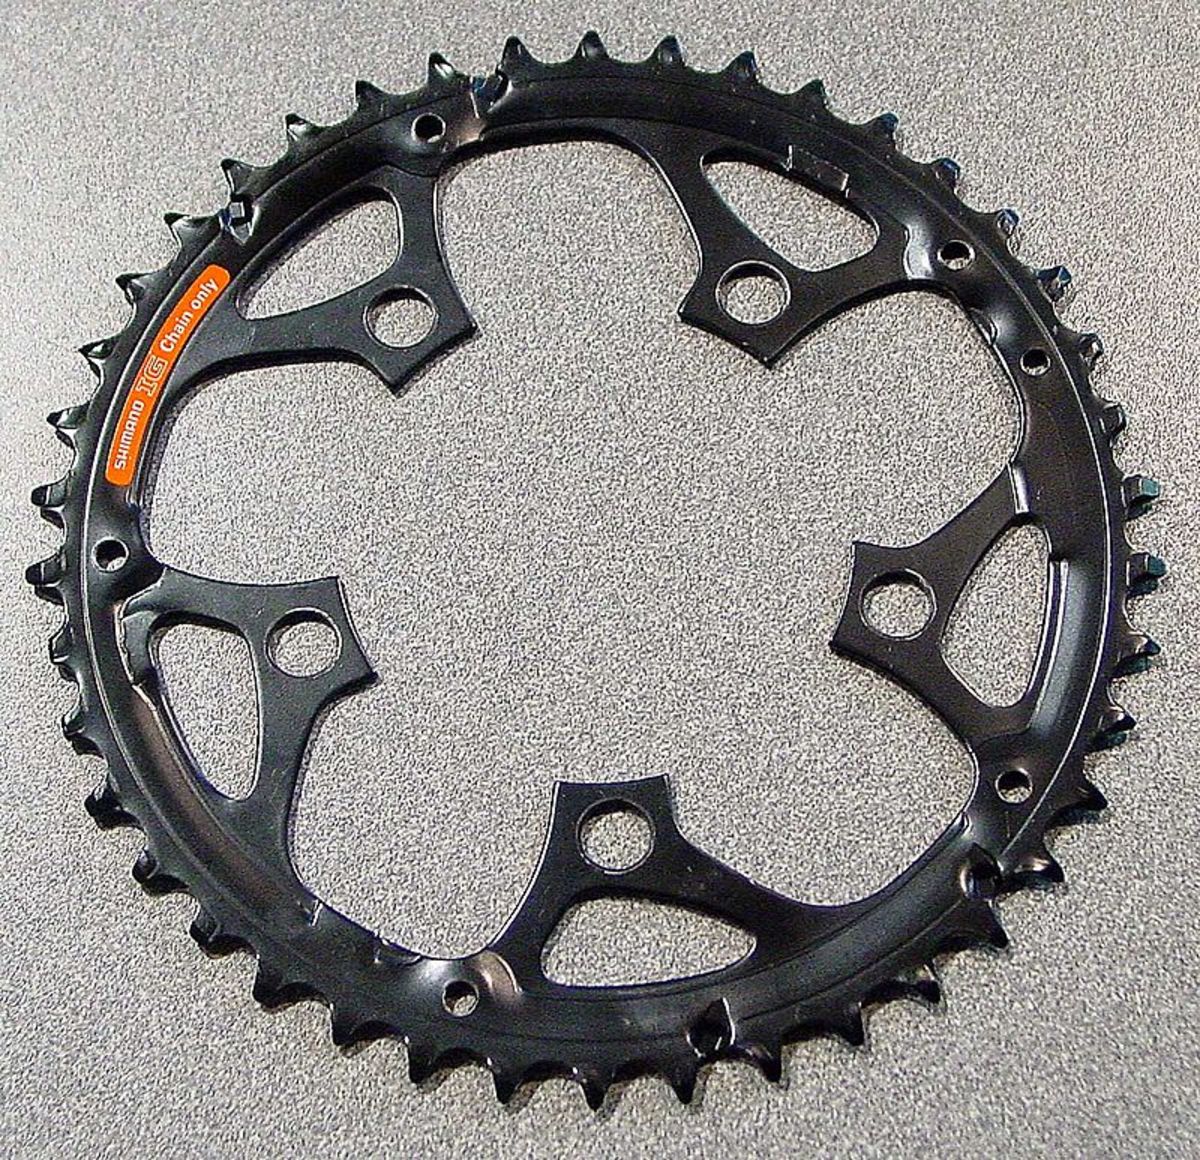 A bicycle chainring